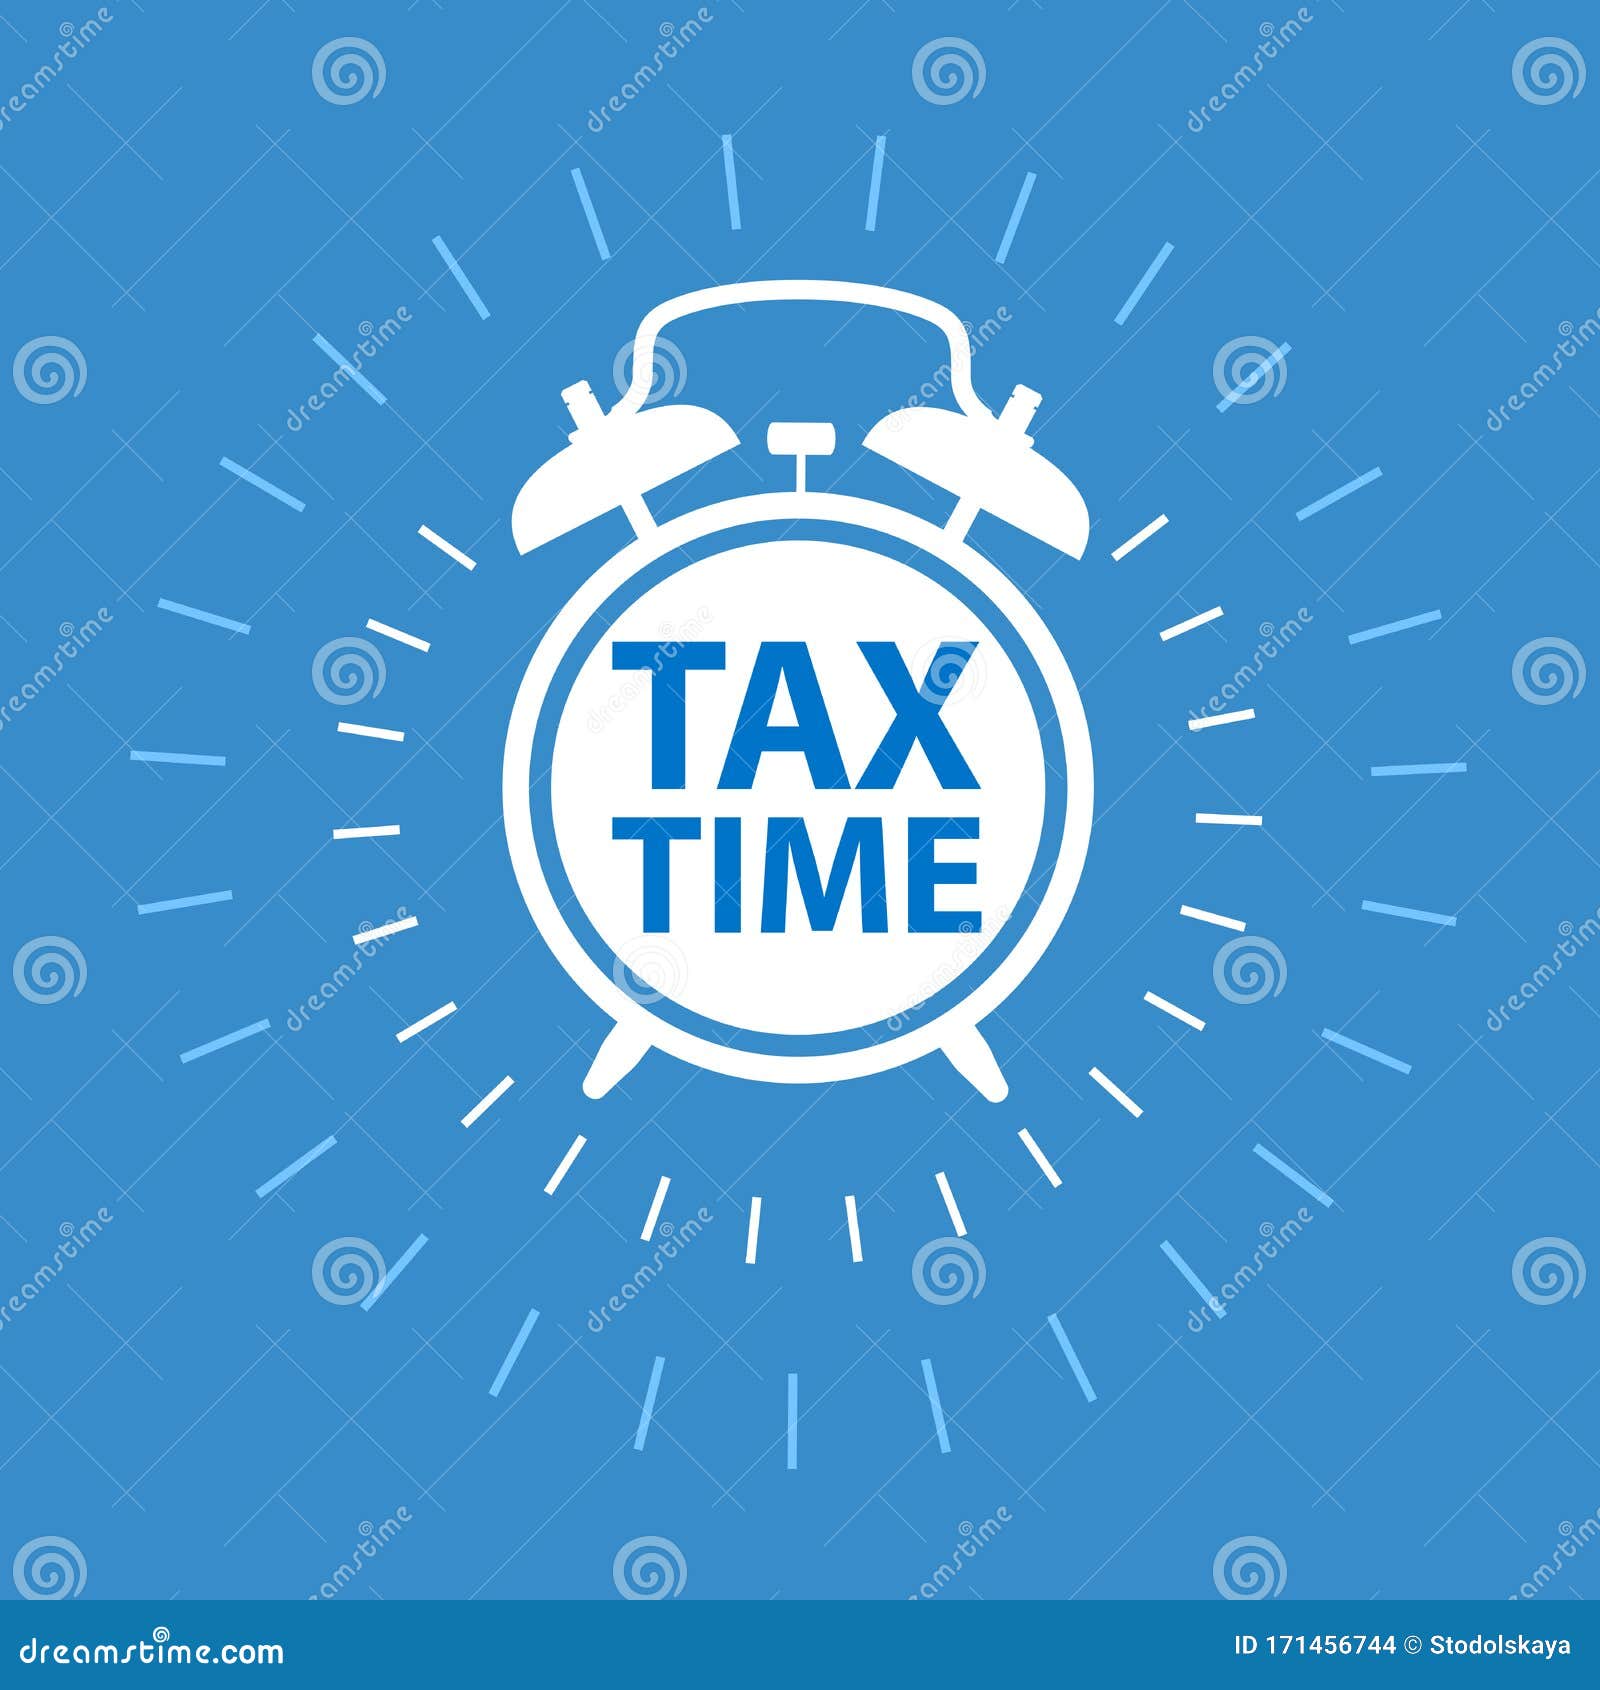 tax-payment-time-icon-reminder-about-taxation-stock-vector